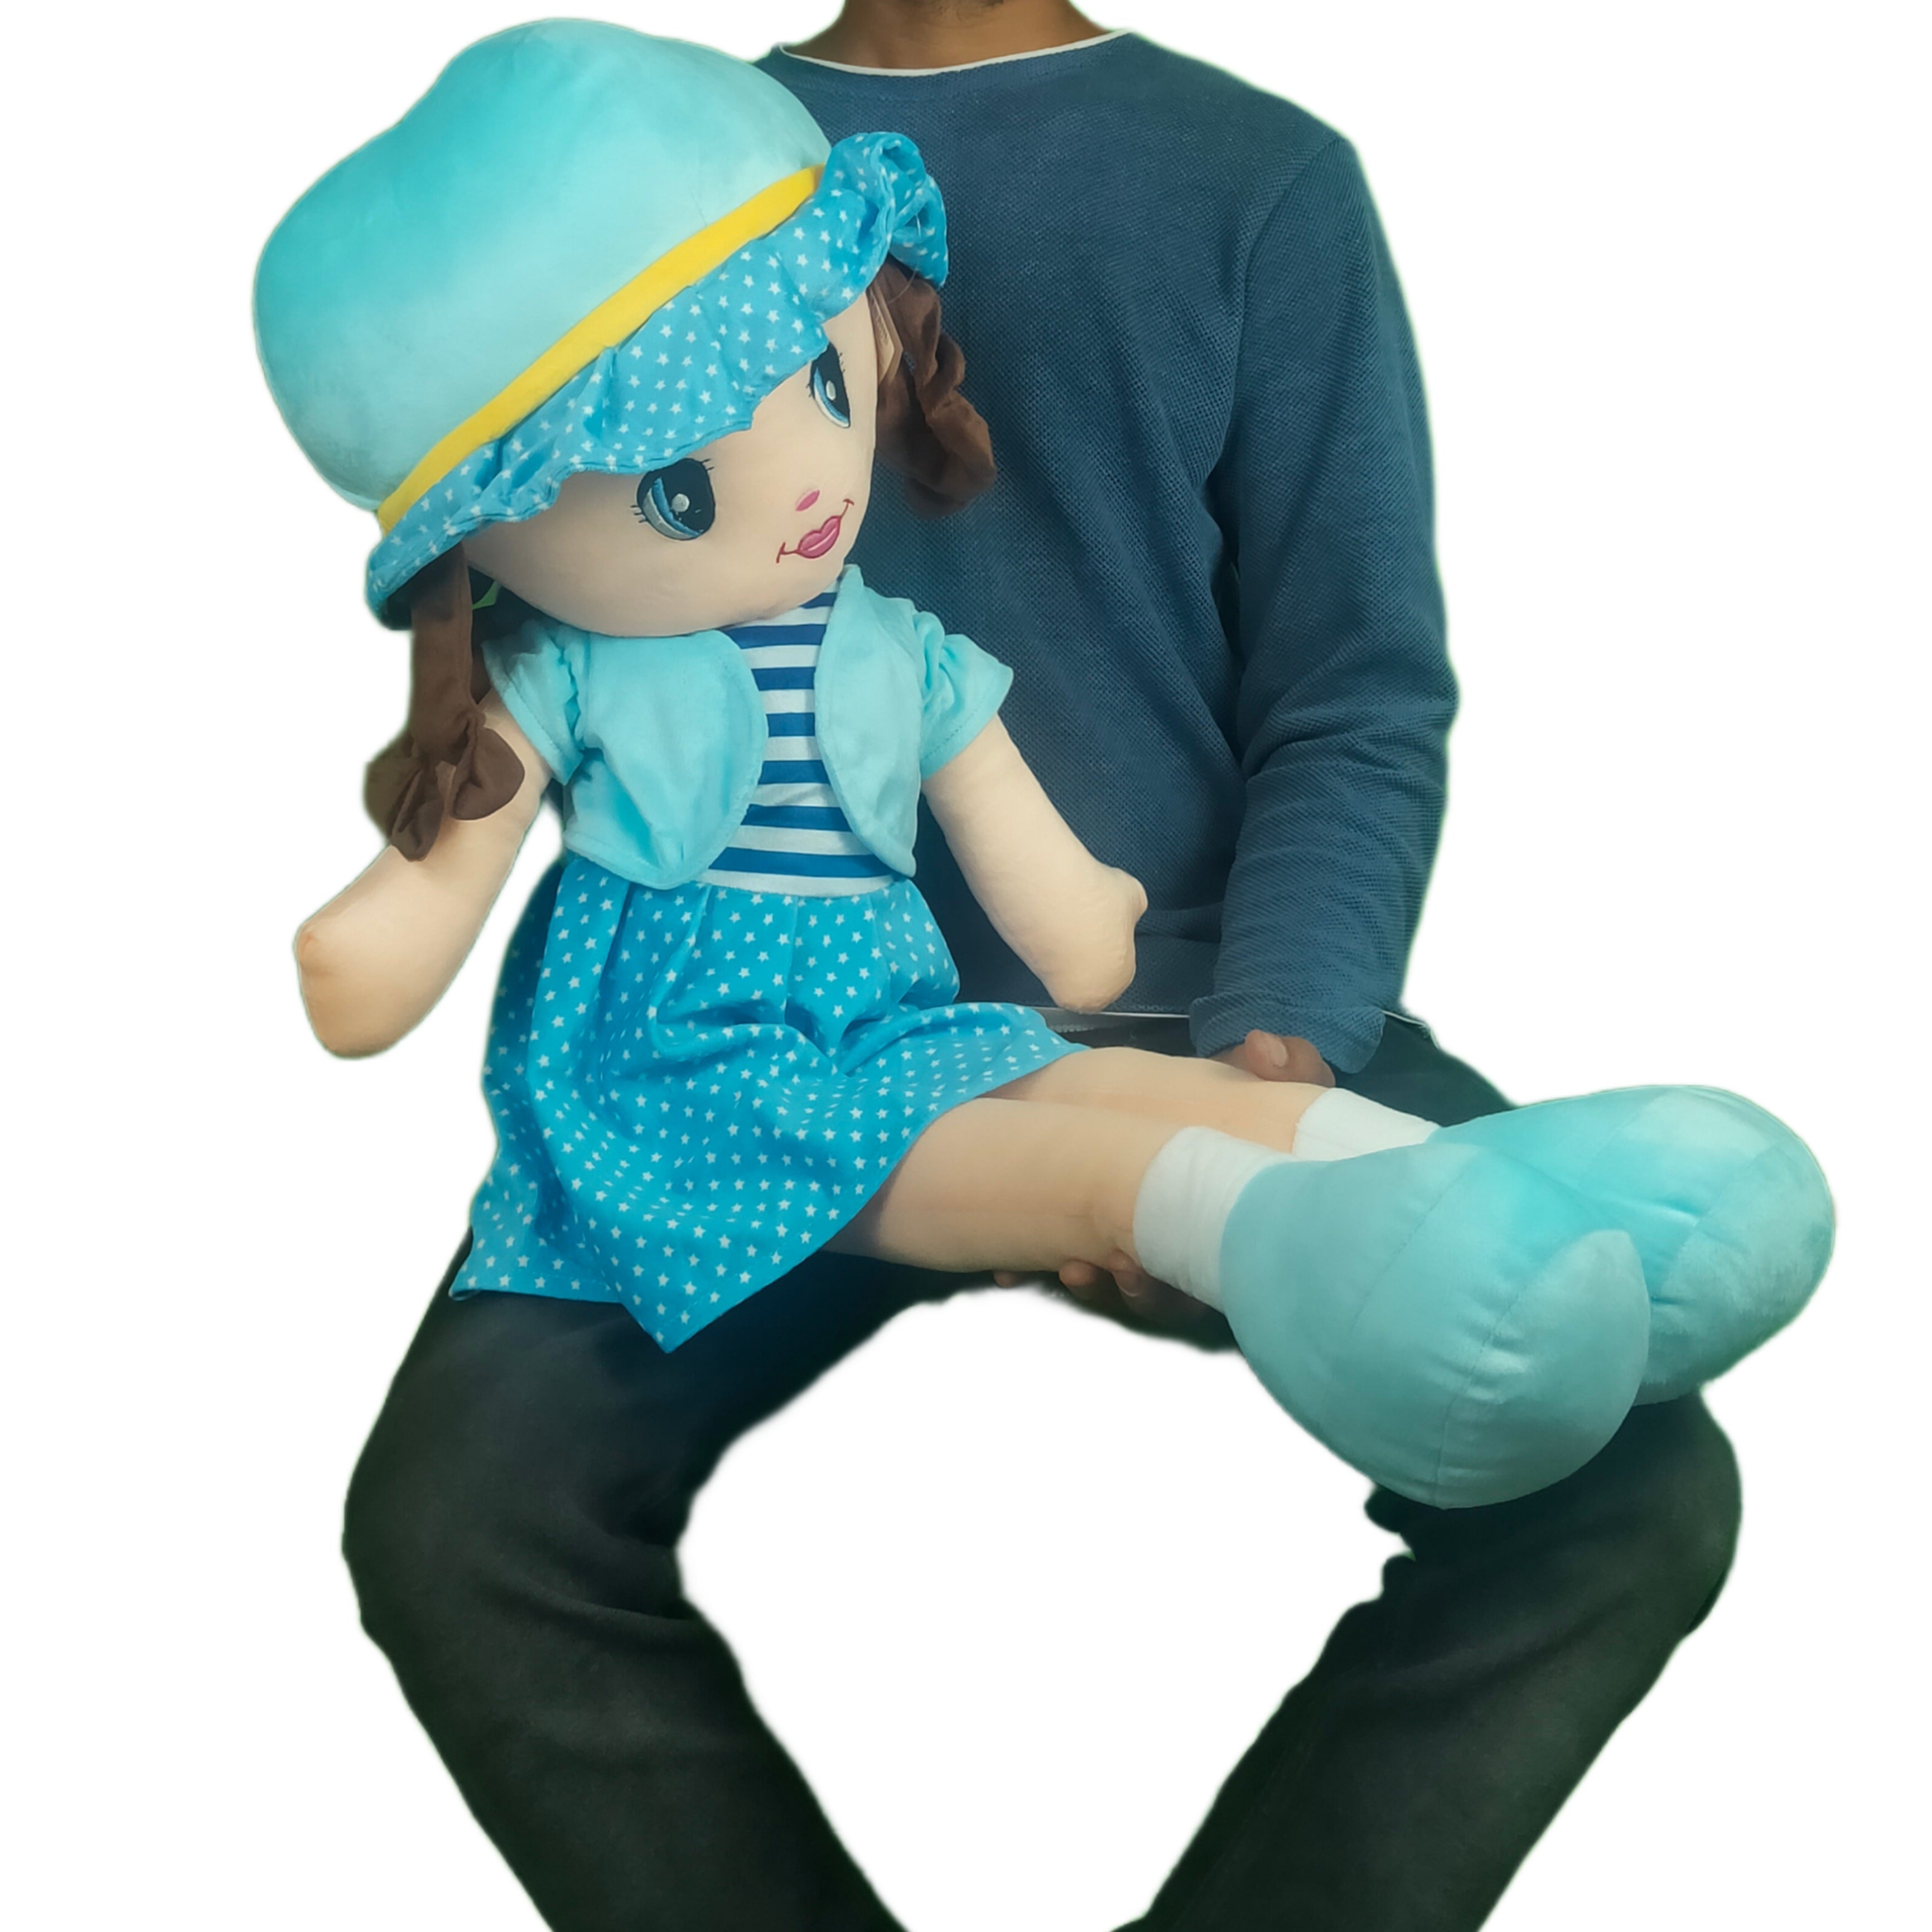 Play Hour Winky Rag Doll Plush Soft Toy Wearing Sky Dress for Ages 3 Years and Up, 100cm